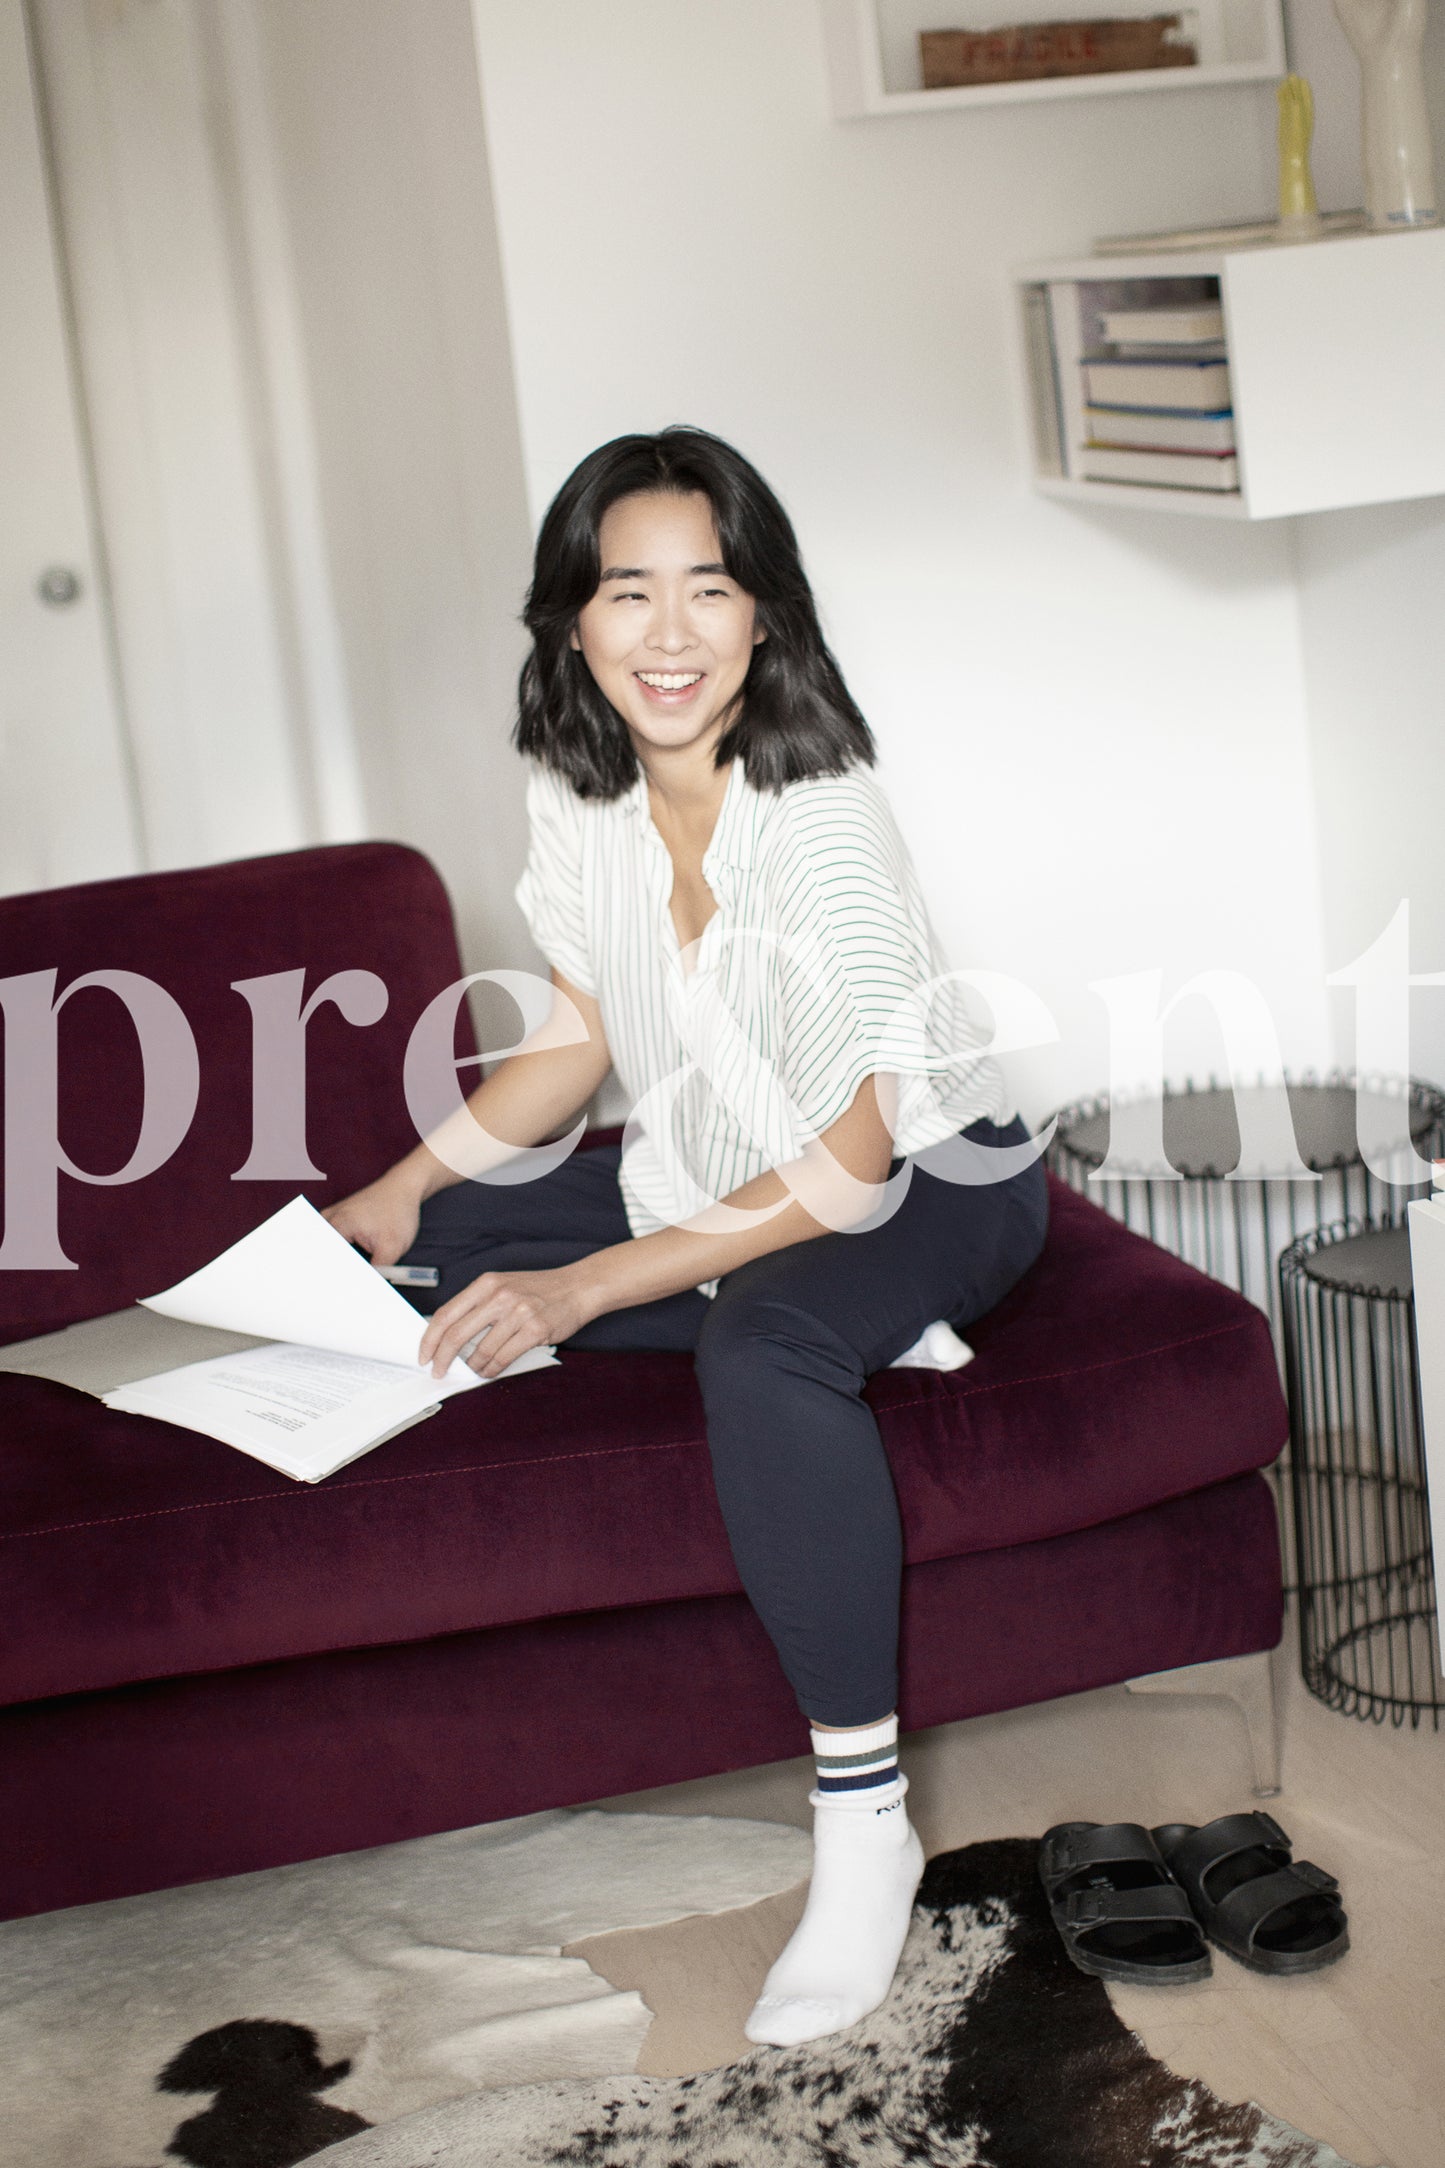 Joyful person sorting papers on a couch